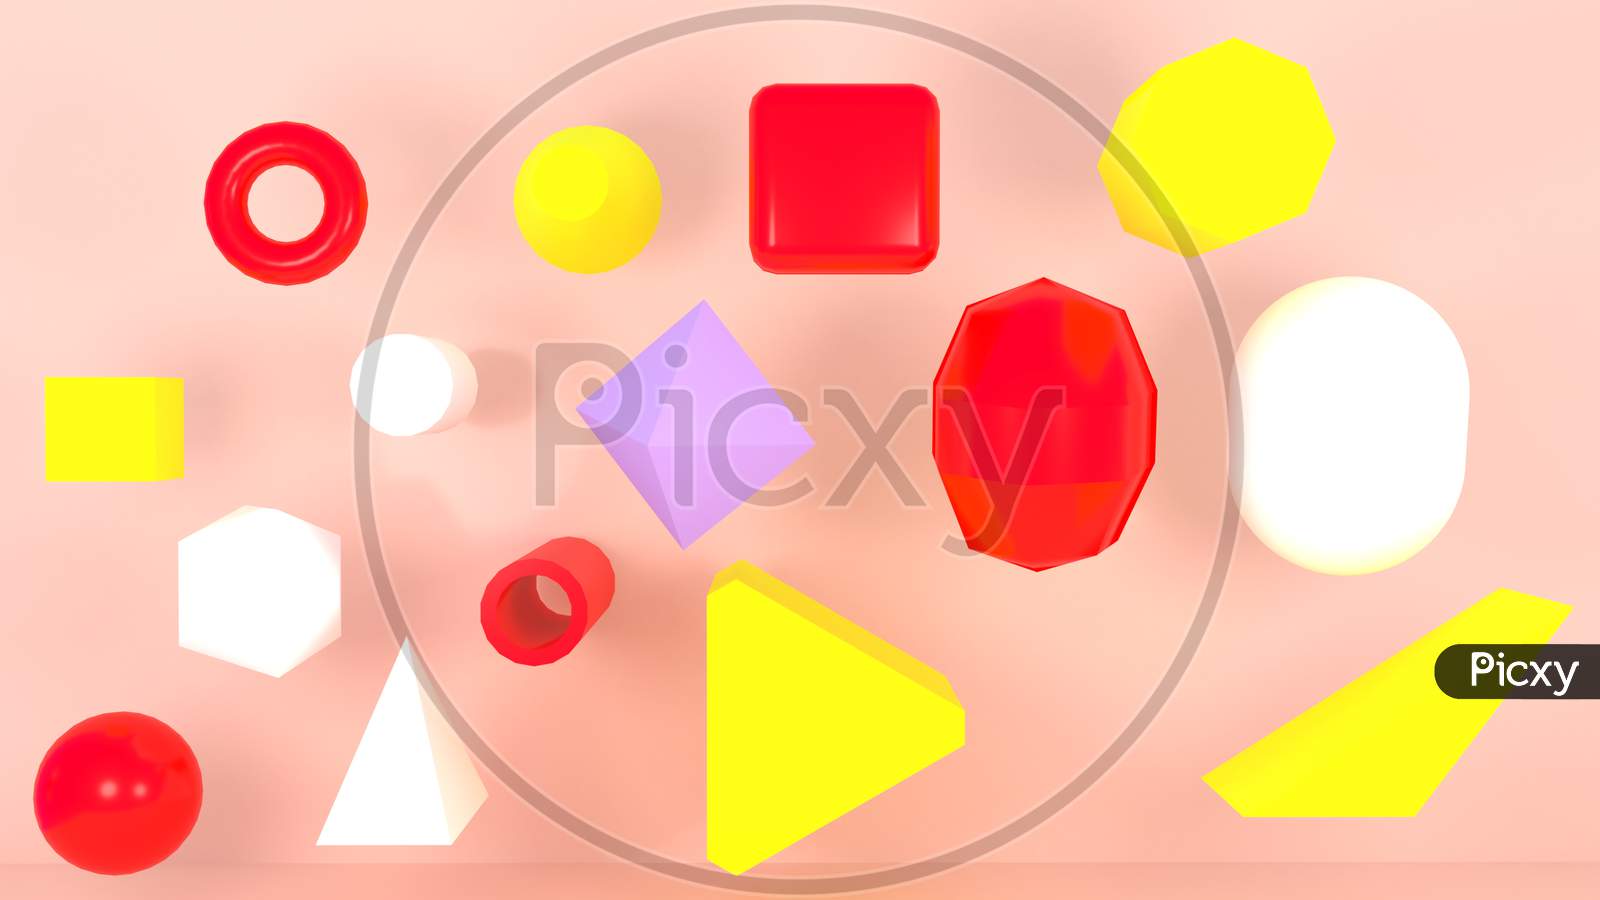 Geometric Abstract Background With Colourful 3D Rendering Image